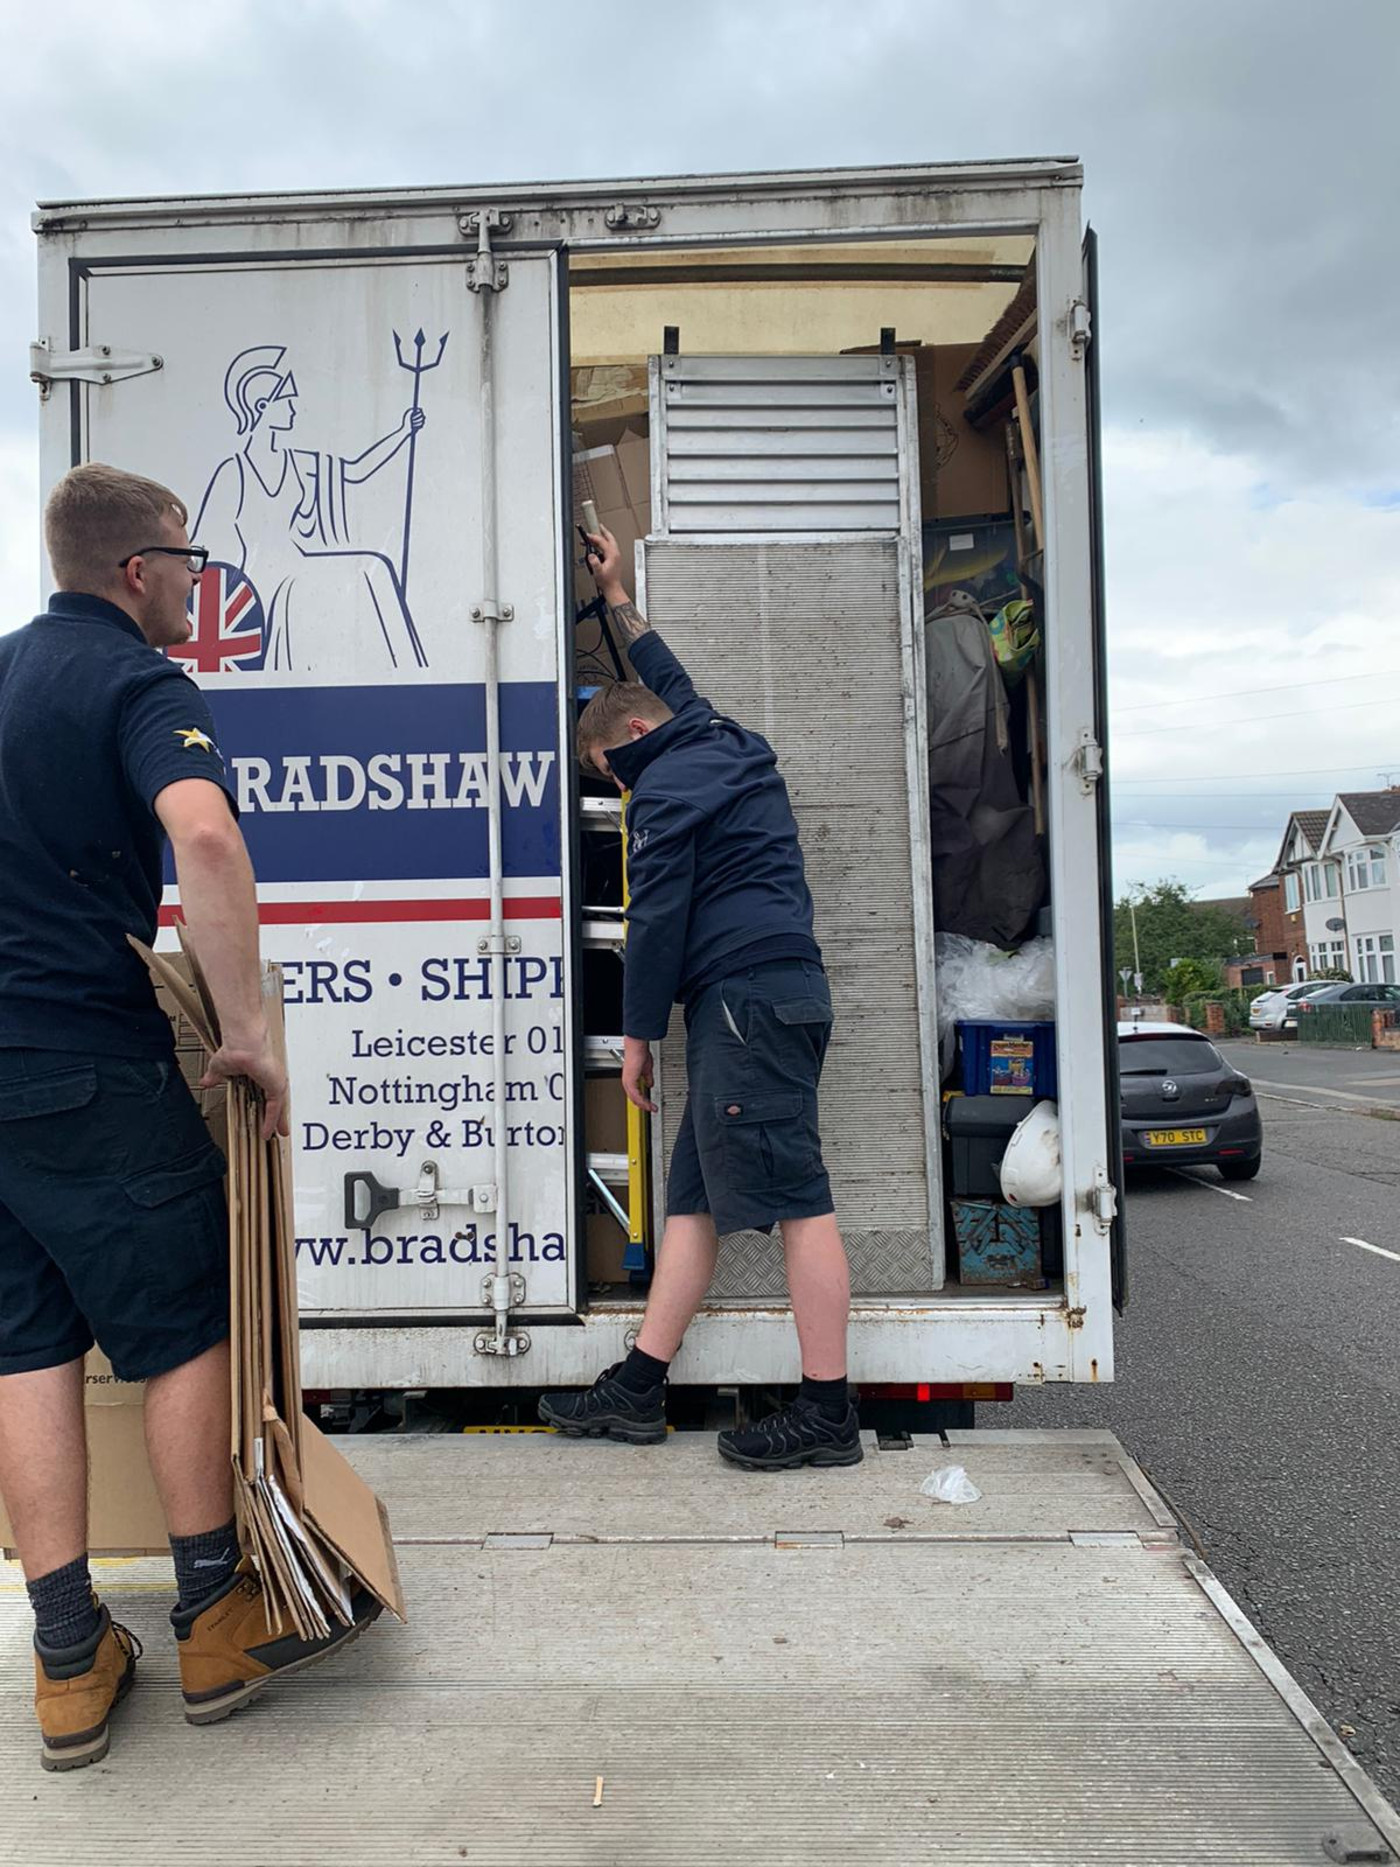 Bradshaw Moving Services Removals in Nottingham